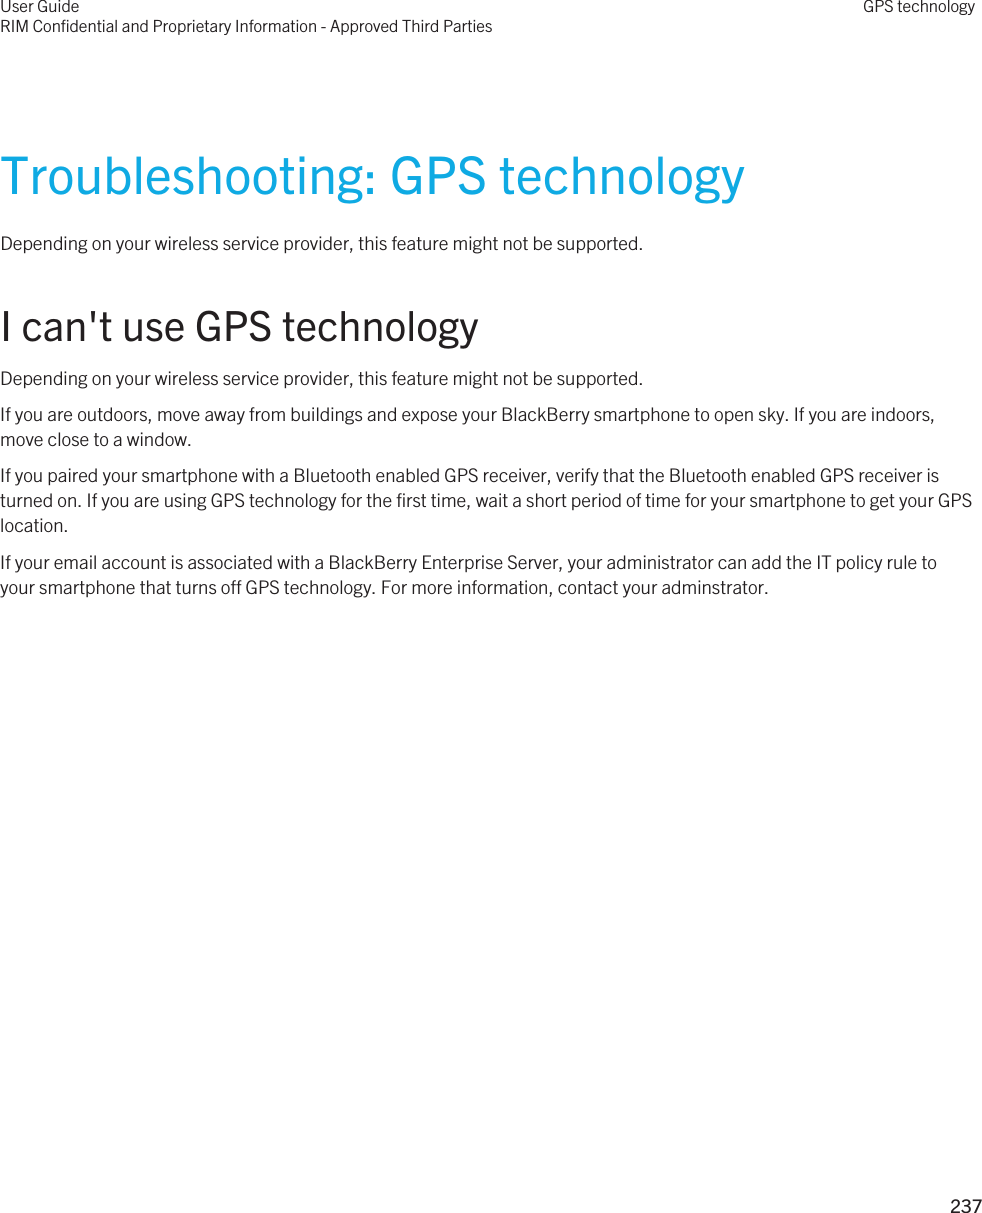 Troubleshooting: GPS technologyDepending on your wireless service provider, this feature might not be supported. I can&apos;t use GPS technologyDepending on your wireless service provider, this feature might not be supported. If you are outdoors, move away from buildings and expose your BlackBerry smartphone to open sky. If you are indoors, move close to a window.If you paired your smartphone with a Bluetooth enabled GPS receiver, verify that the Bluetooth enabled GPS receiver is turned on. If you are using GPS technology for the first time, wait a short period of time for your smartphone to get your GPS location.If your email account is associated with a BlackBerry Enterprise Server, your administrator can add the IT policy rule to your smartphone that turns off GPS technology. For more information, contact your adminstrator.User GuideRIM Confidential and Proprietary Information - Approved Third PartiesGPS technology237 